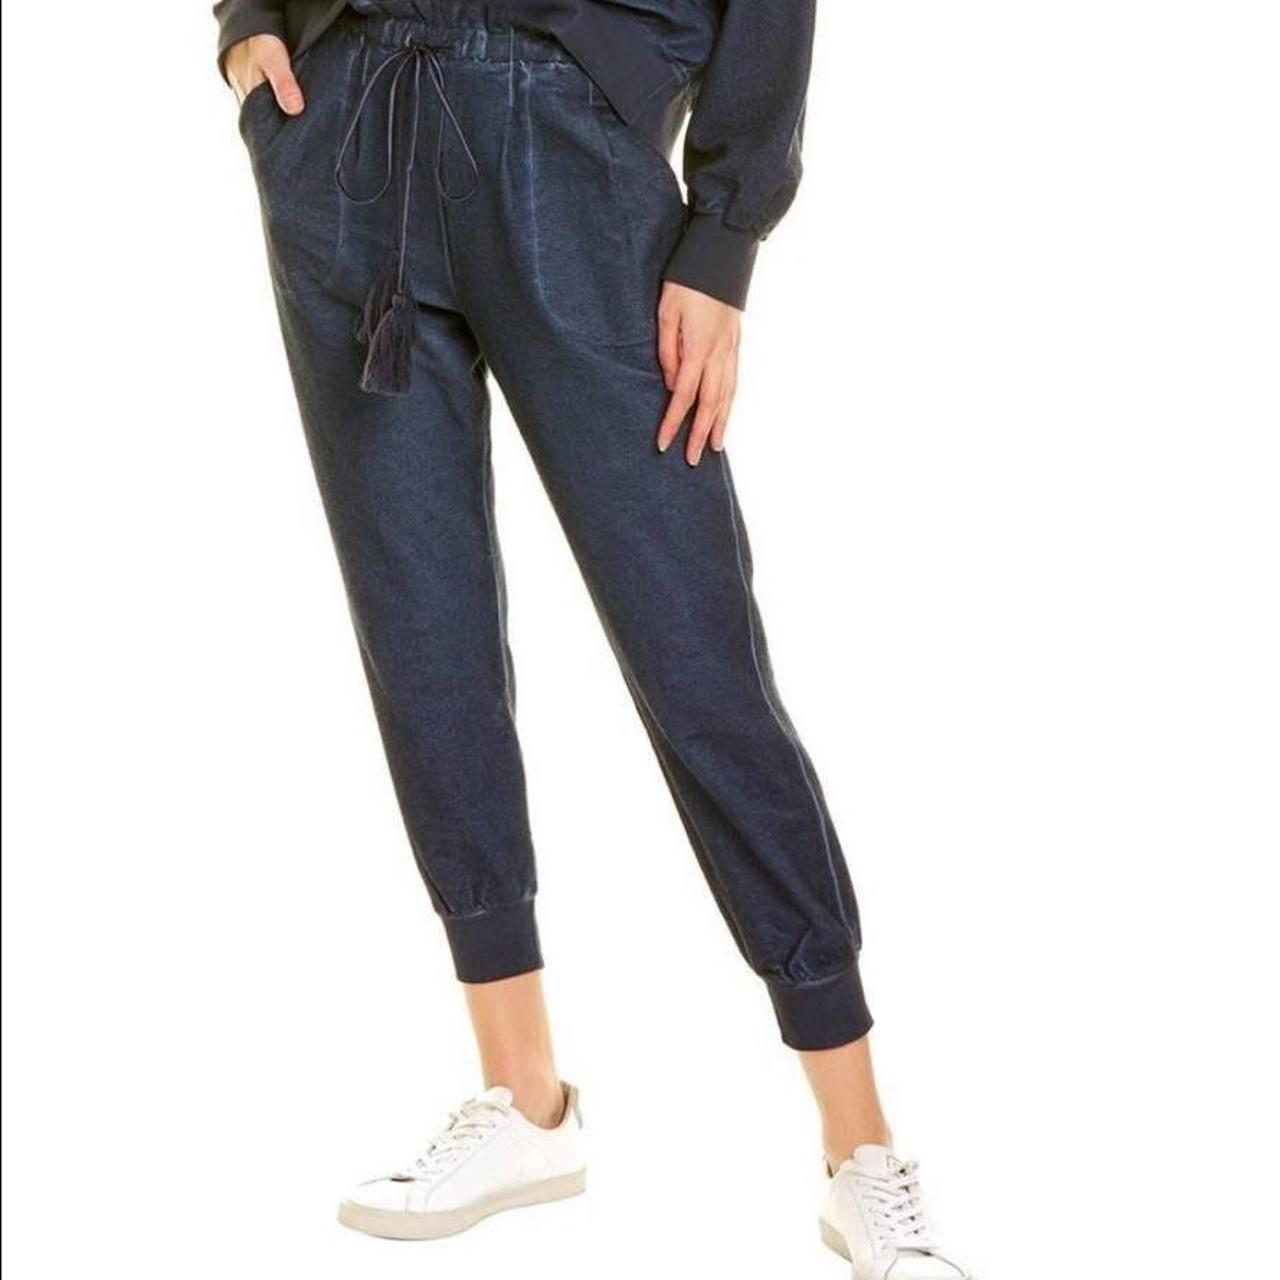 & Other Stories | Pants & Jumpsuits | Nwt Other Stories Paperbag Waist  Trousers In Navy Size 6 | Poshmark